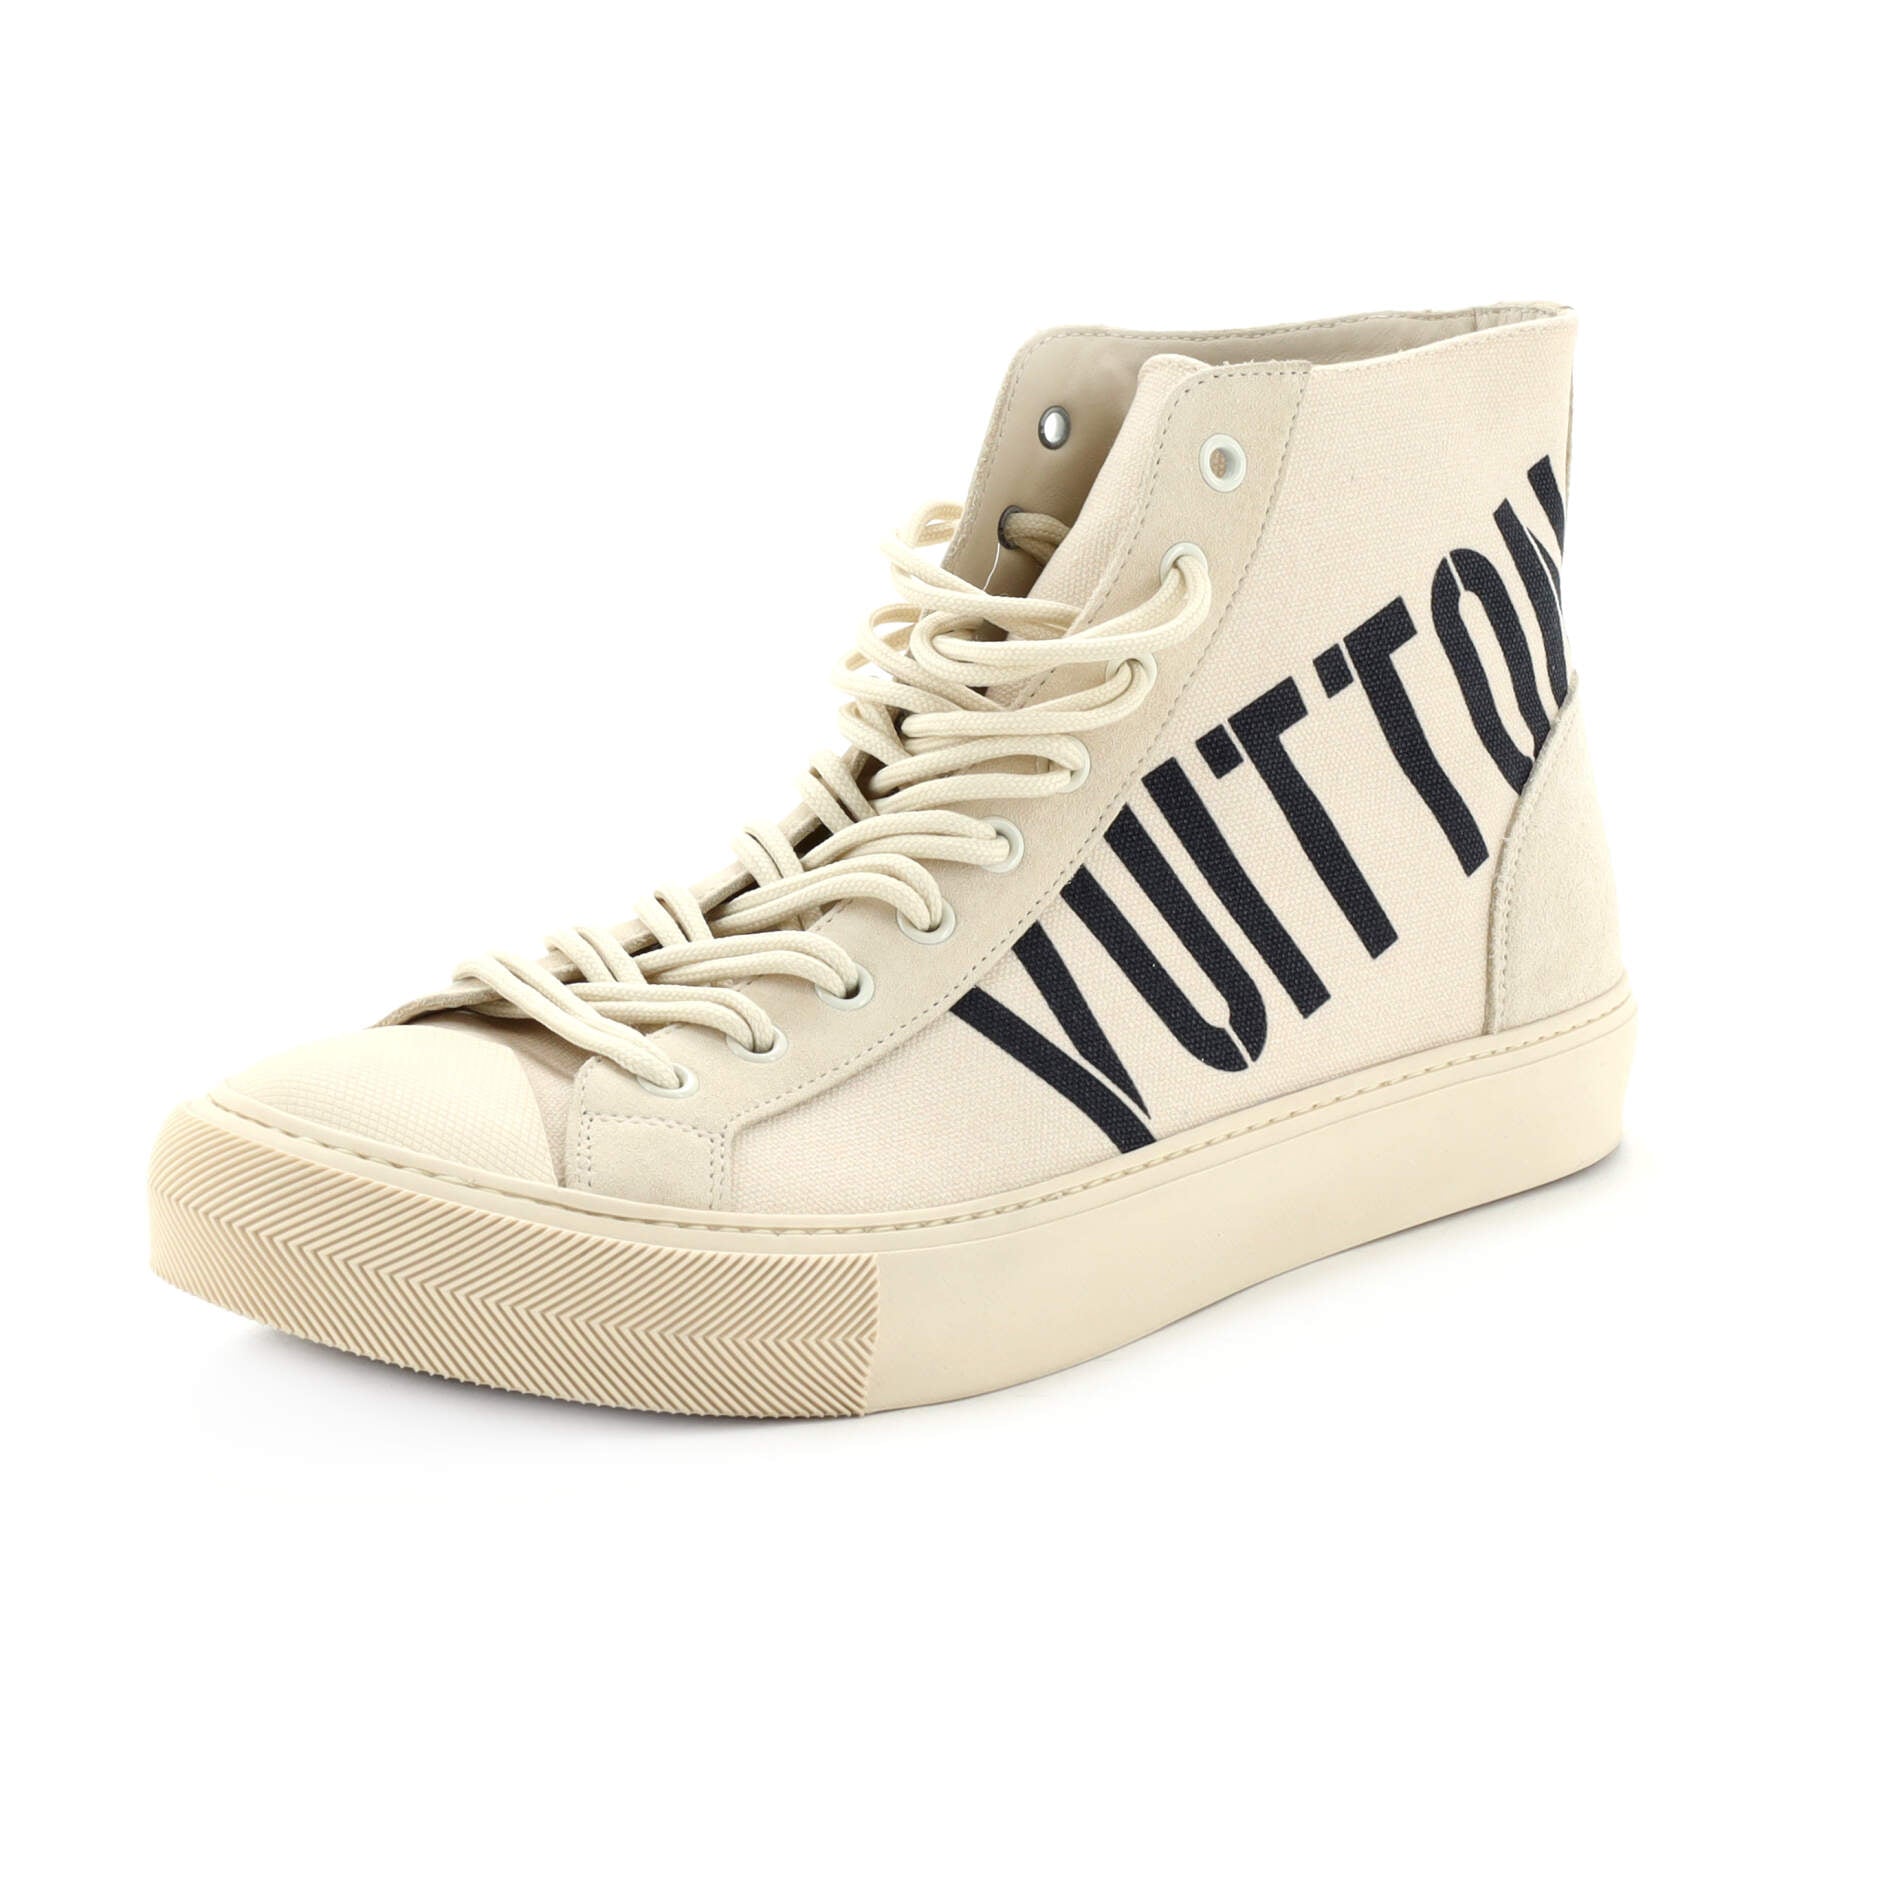 Women's Tattoo High-Top Sneakers Logo Canvas and Suede